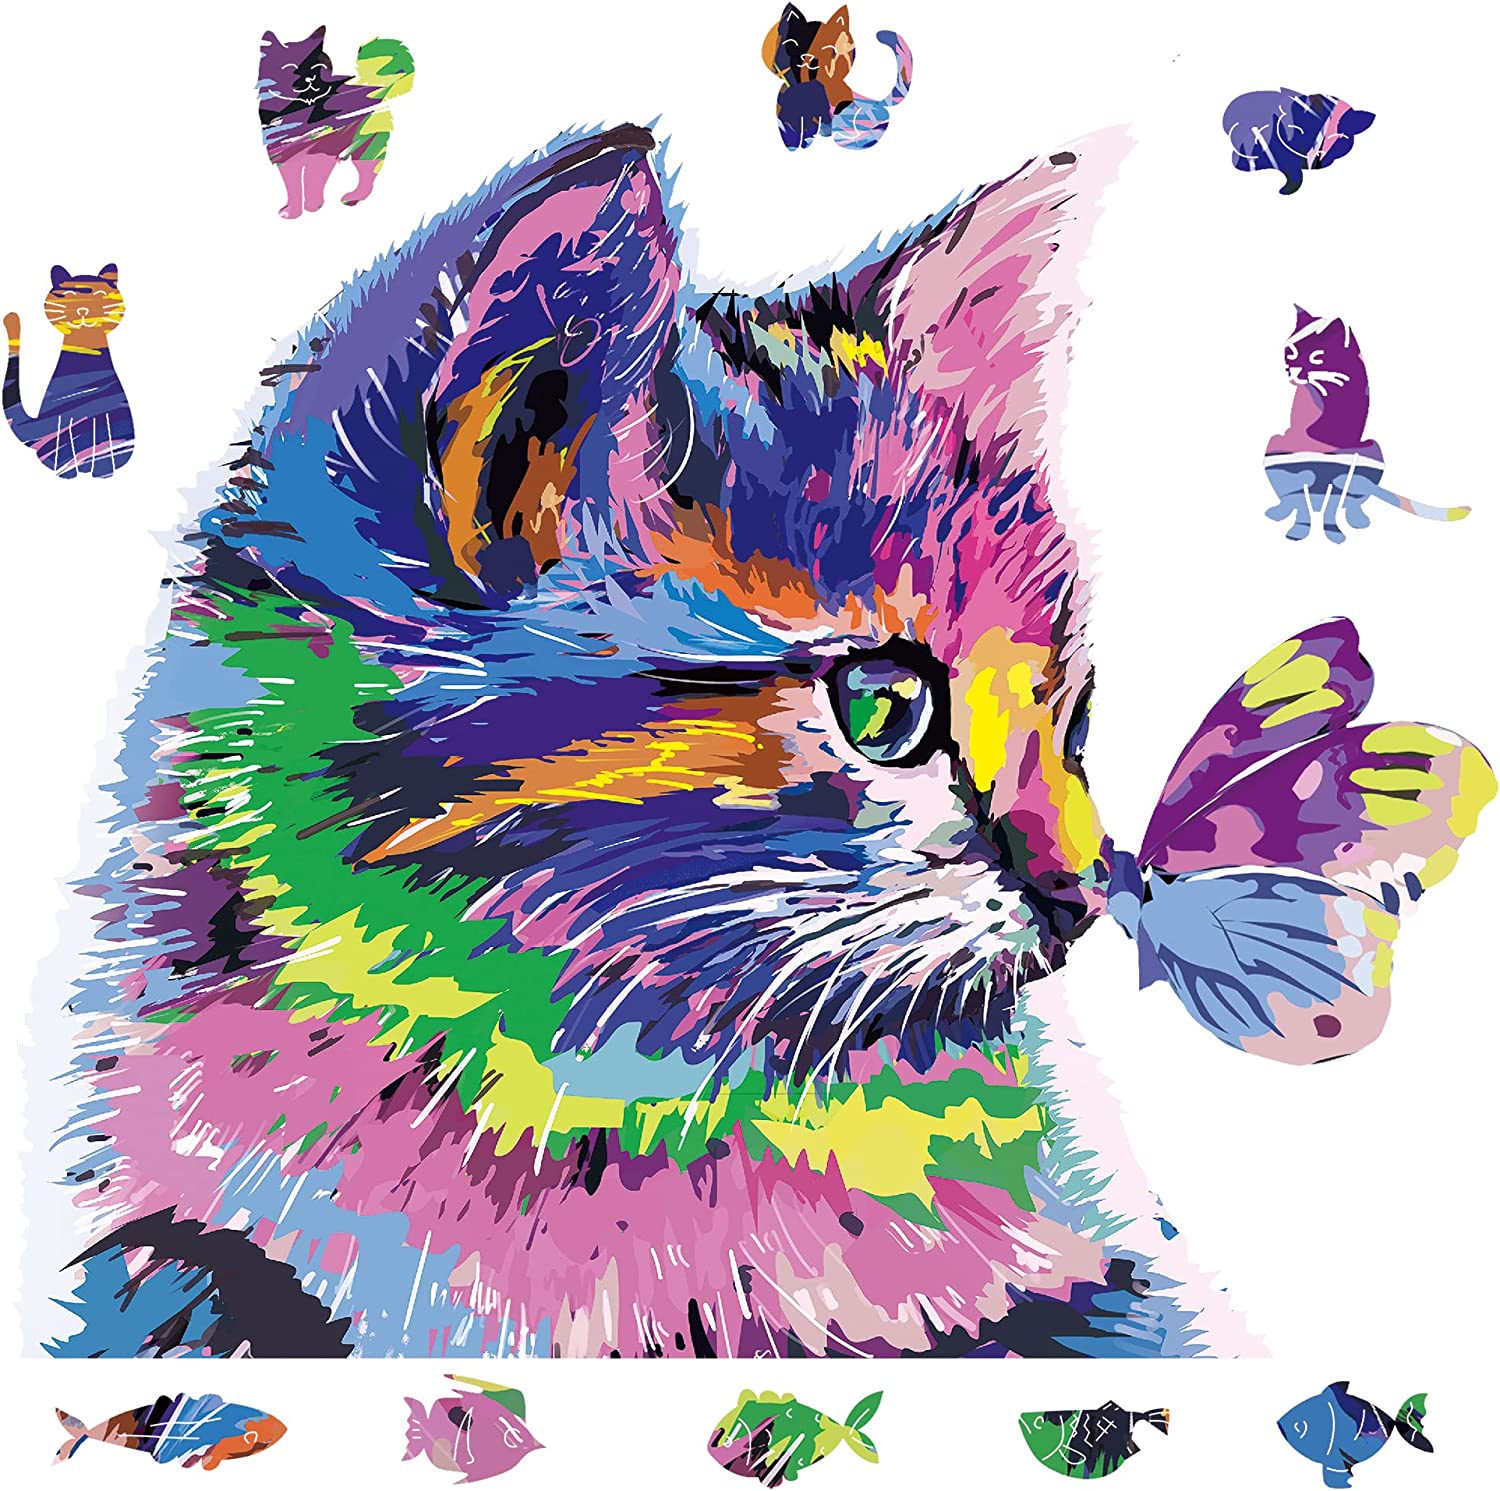 cat shaped wooden jigsaw puzzle on a white background